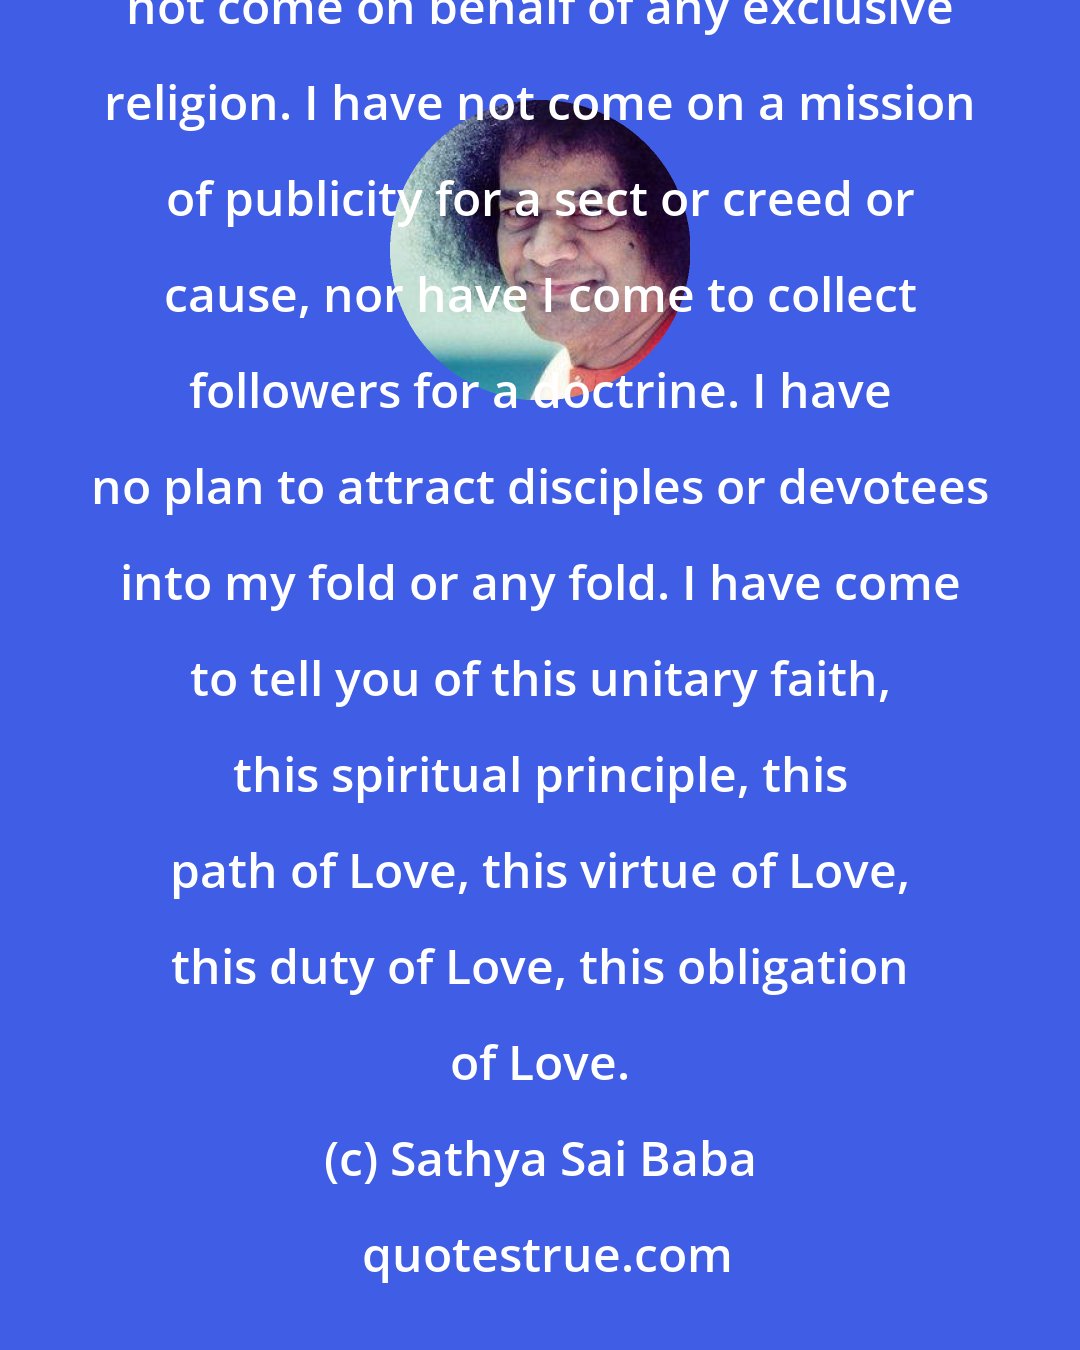 Sathya Sai Baba: I have come to light the lamp of Love in your hearts, to see that it shines day by day with added luster. I have not come on behalf of any exclusive religion. I have not come on a mission of publicity for a sect or creed or cause, nor have I come to collect followers for a doctrine. I have no plan to attract disciples or devotees into my fold or any fold. I have come to tell you of this unitary faith, this spiritual principle, this path of Love, this virtue of Love, this duty of Love, this obligation of Love.